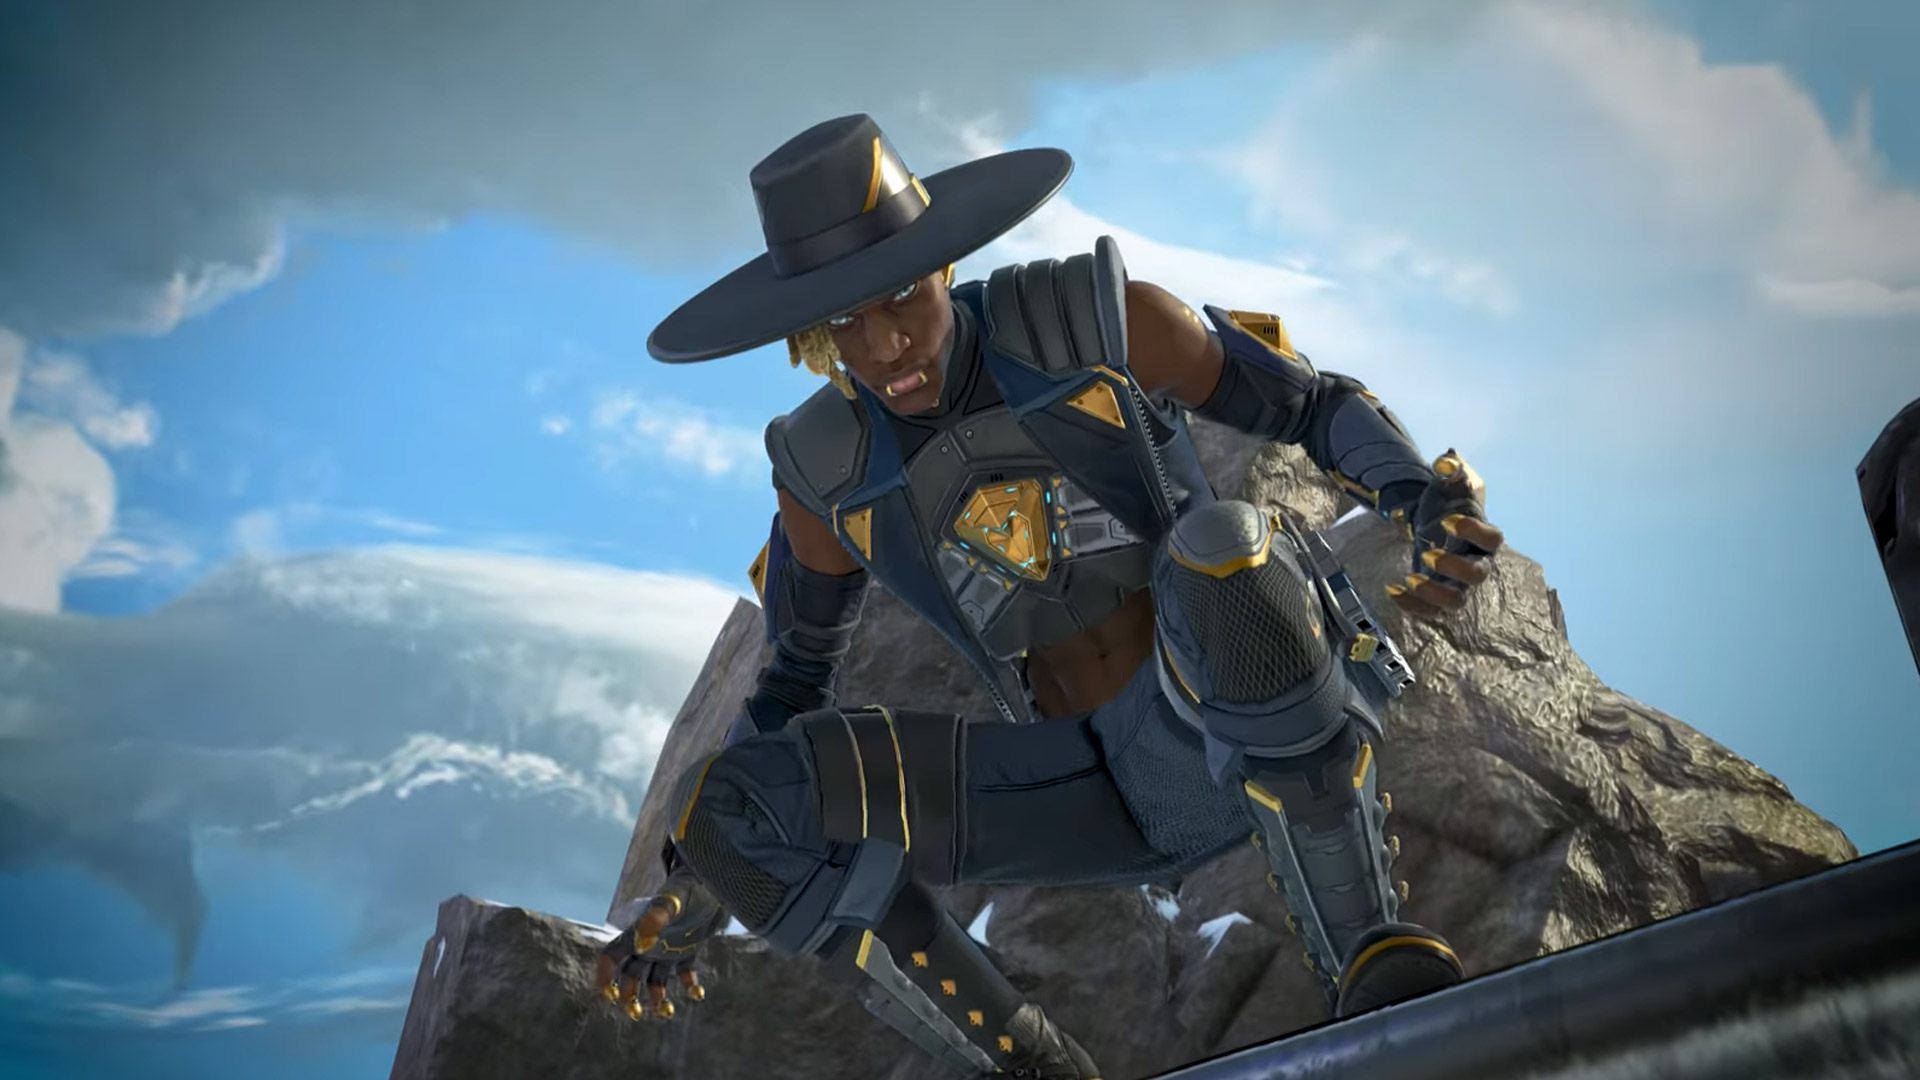 New Apex Legends character trailer shows of Seer and his abilities